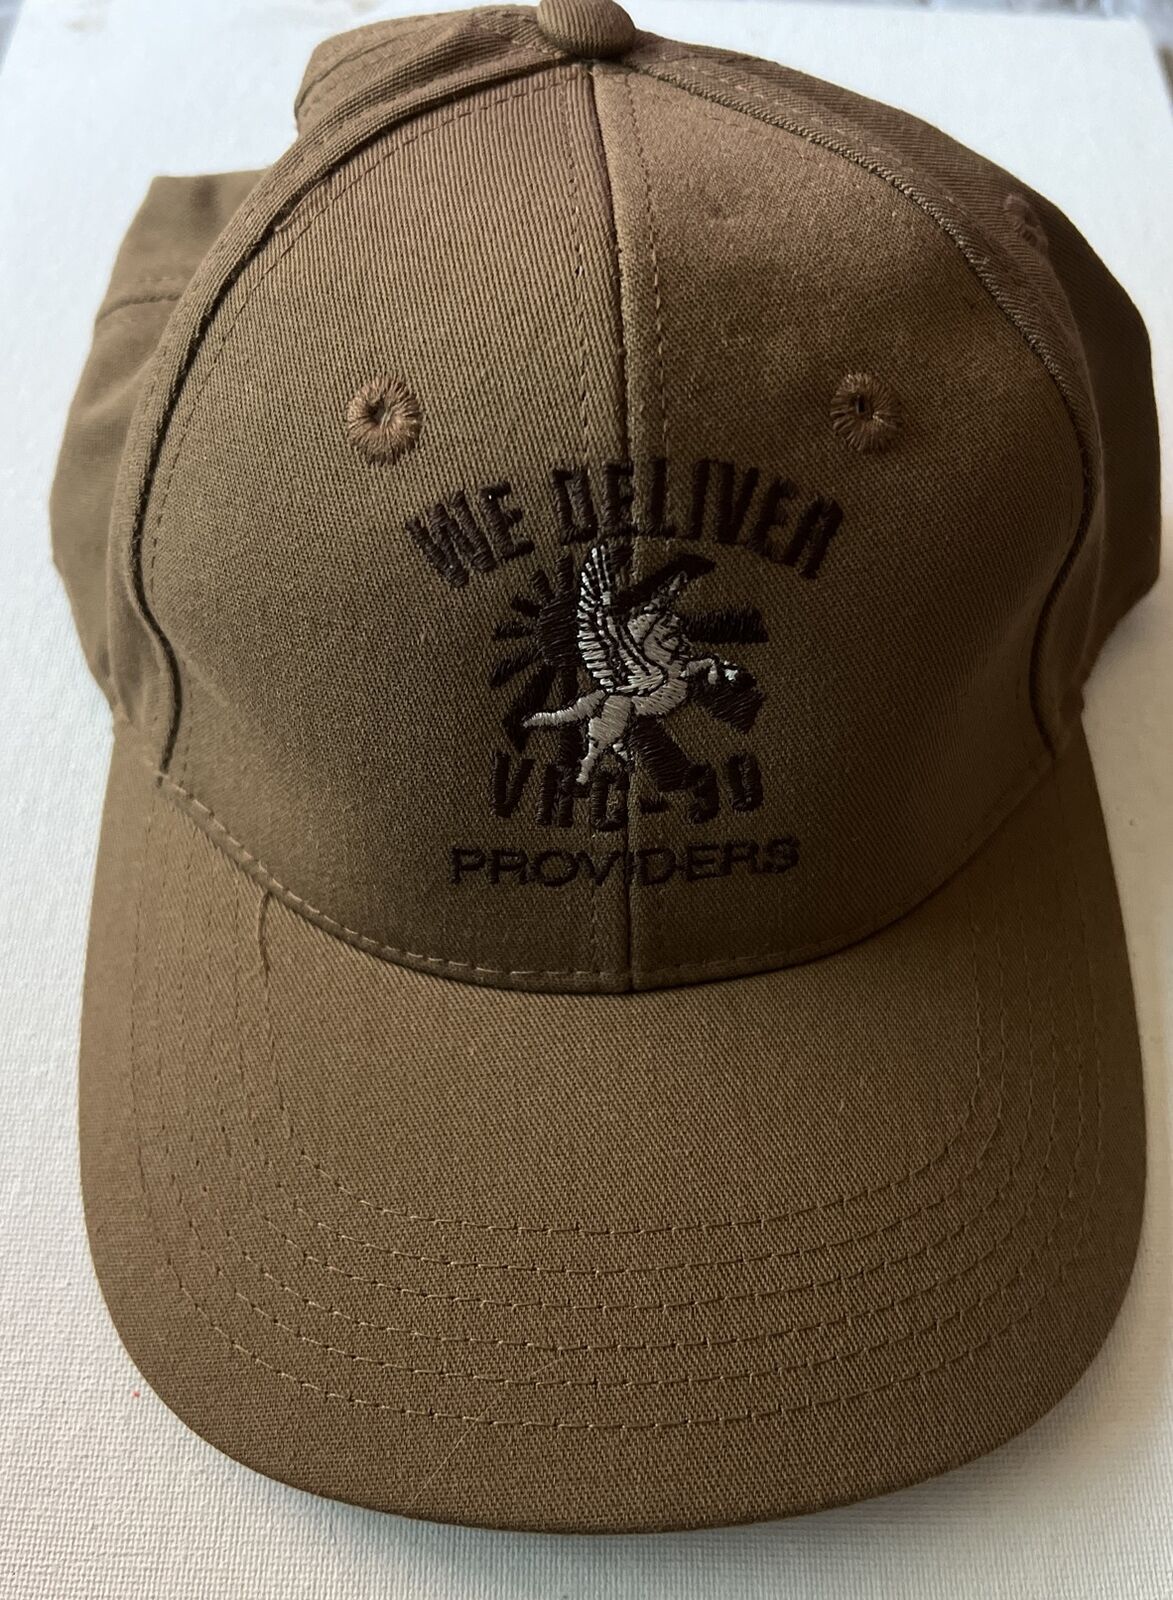 NAVY VRC-30 1 TRAP PROVIDERS WE DELIVER MILITARY EMBROIDERED Hat